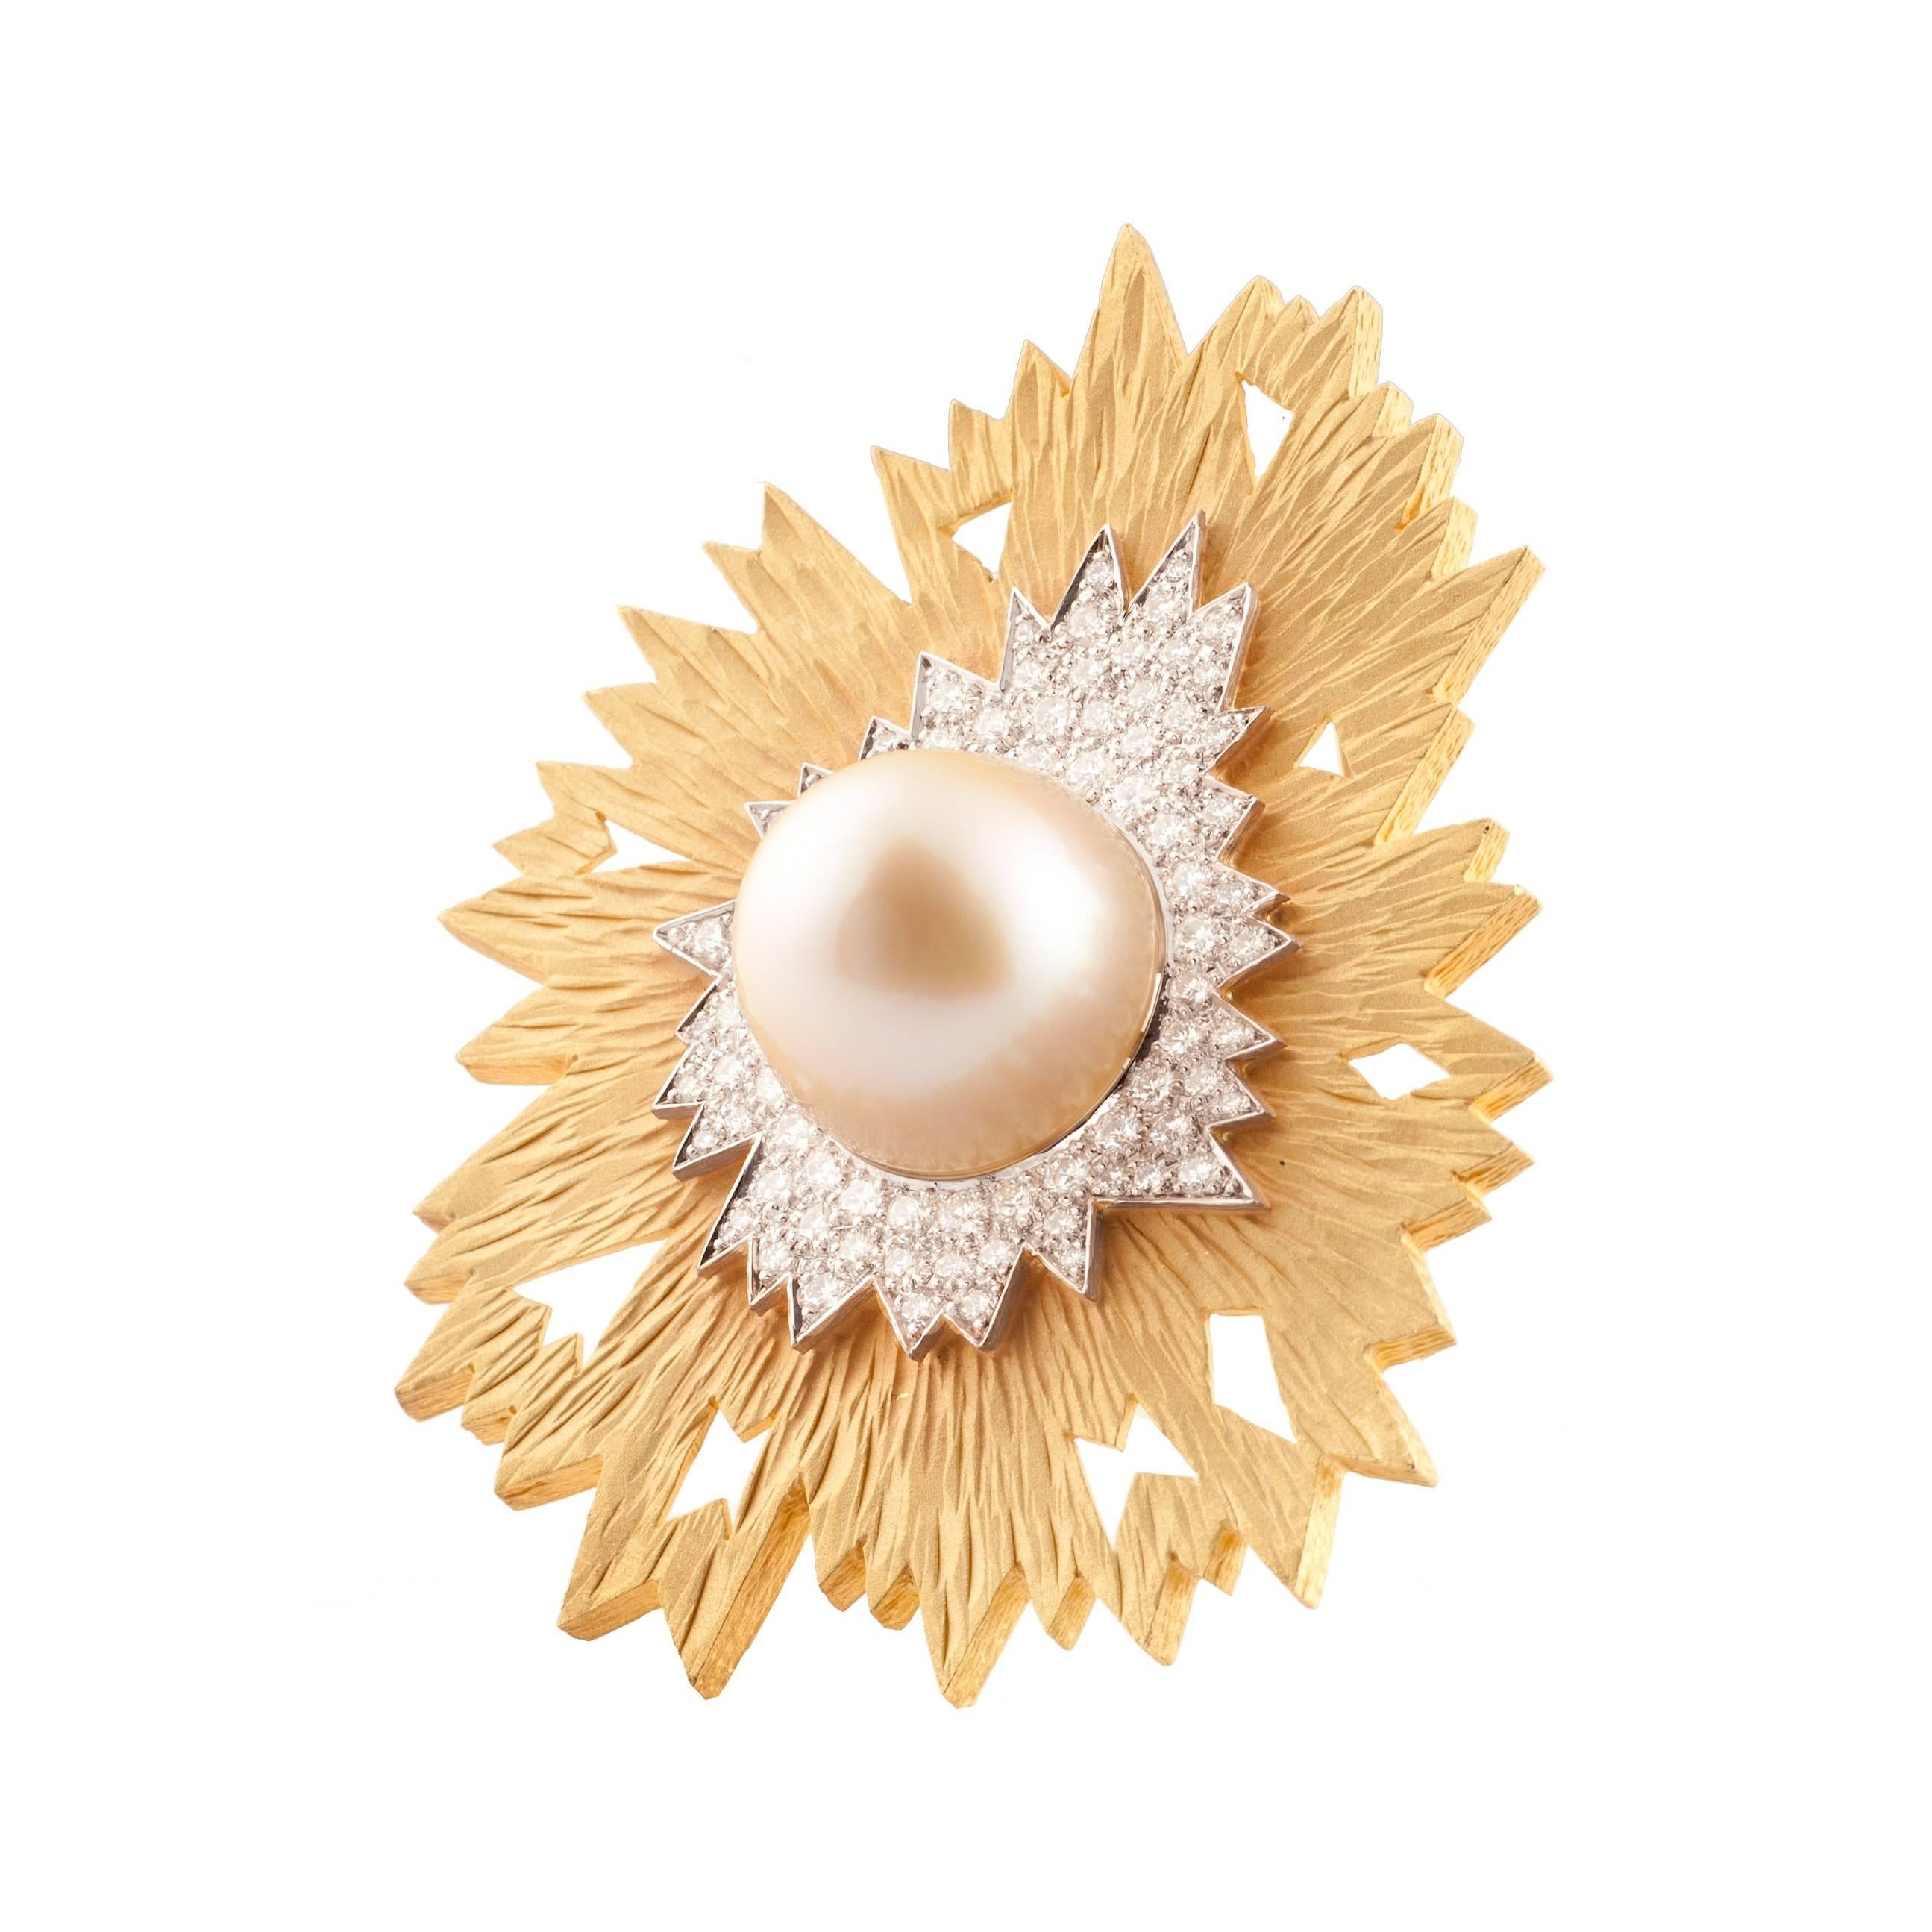 Designed by Andrew Grima in 2002
Brooch/pendant featuring sandblasted yellow gold, mimicking the appearance of wood.  The centre is pavé-set with brilliant cut diamonds (2.7cts) surrounding a large golden South Sea pearl (43cts).  Signed GRIMA, 750